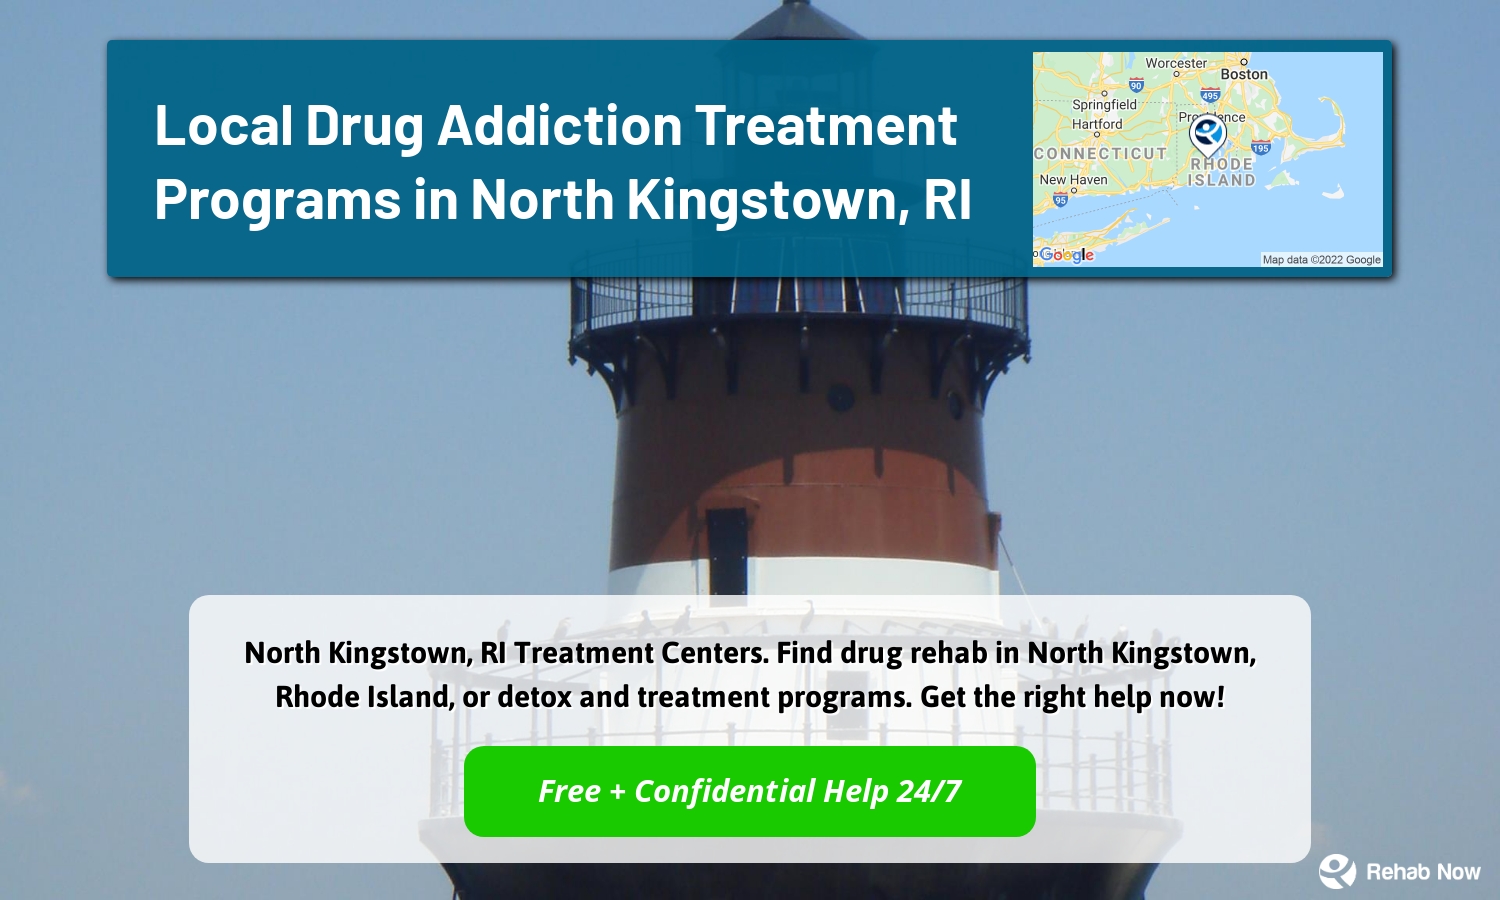 North Kingstown, RI Treatment Centers. Find drug rehab in North Kingstown, Rhode Island, or detox and treatment programs. Get the right help now!